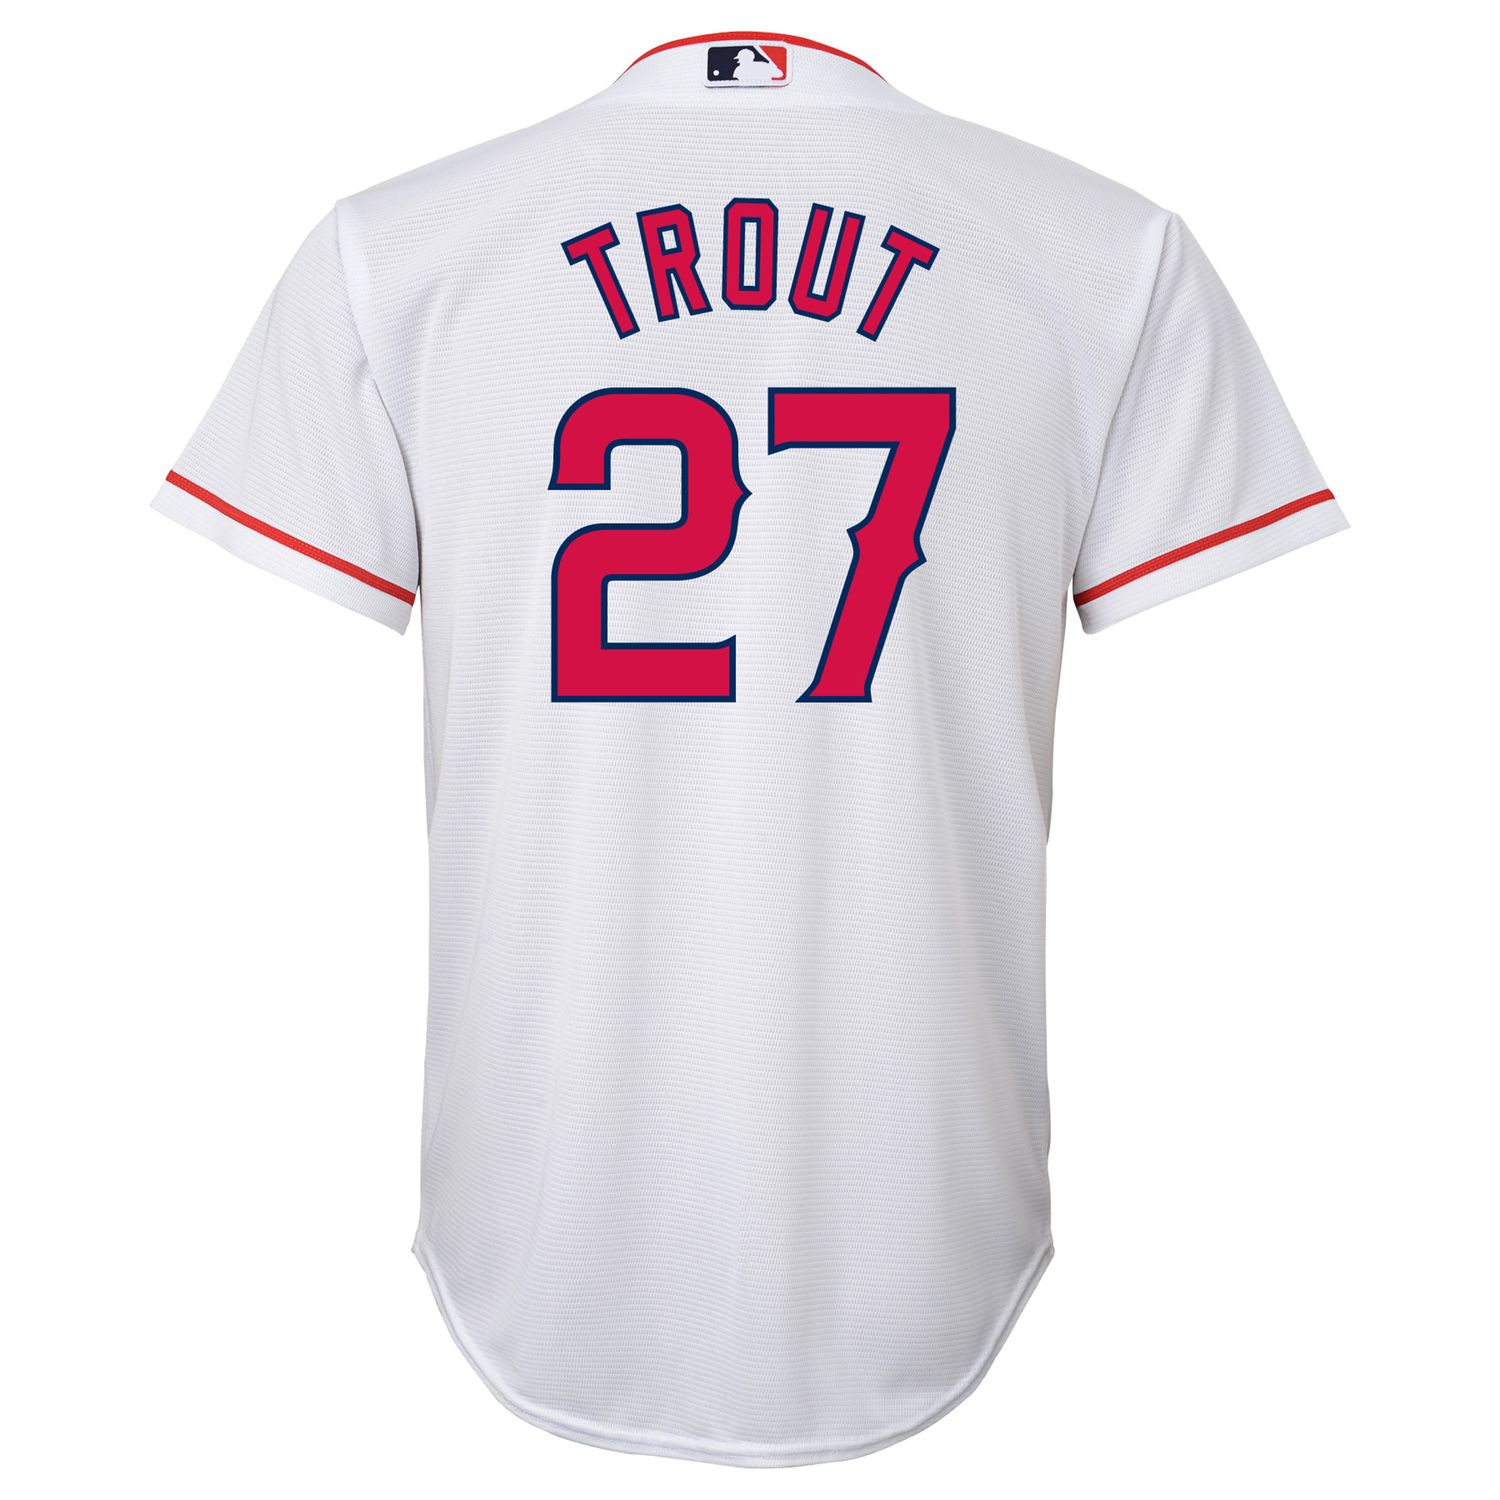 Anaheim Mike Trout Replica Jersey